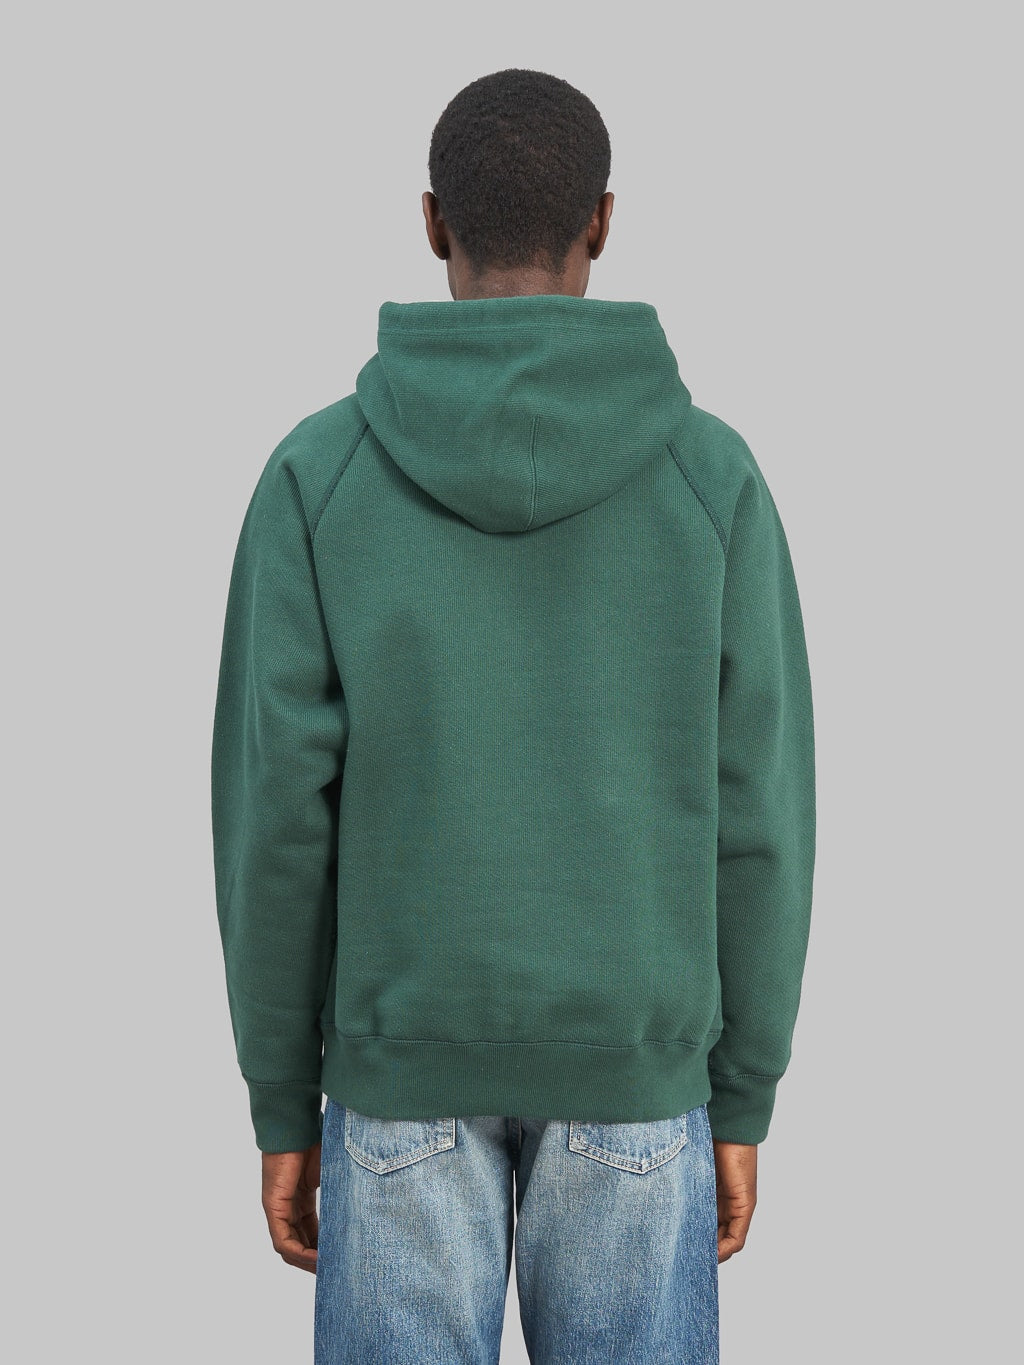 Wonder Looper Pullover Hoodie 701gsm Double Heavyweight French Terry Green